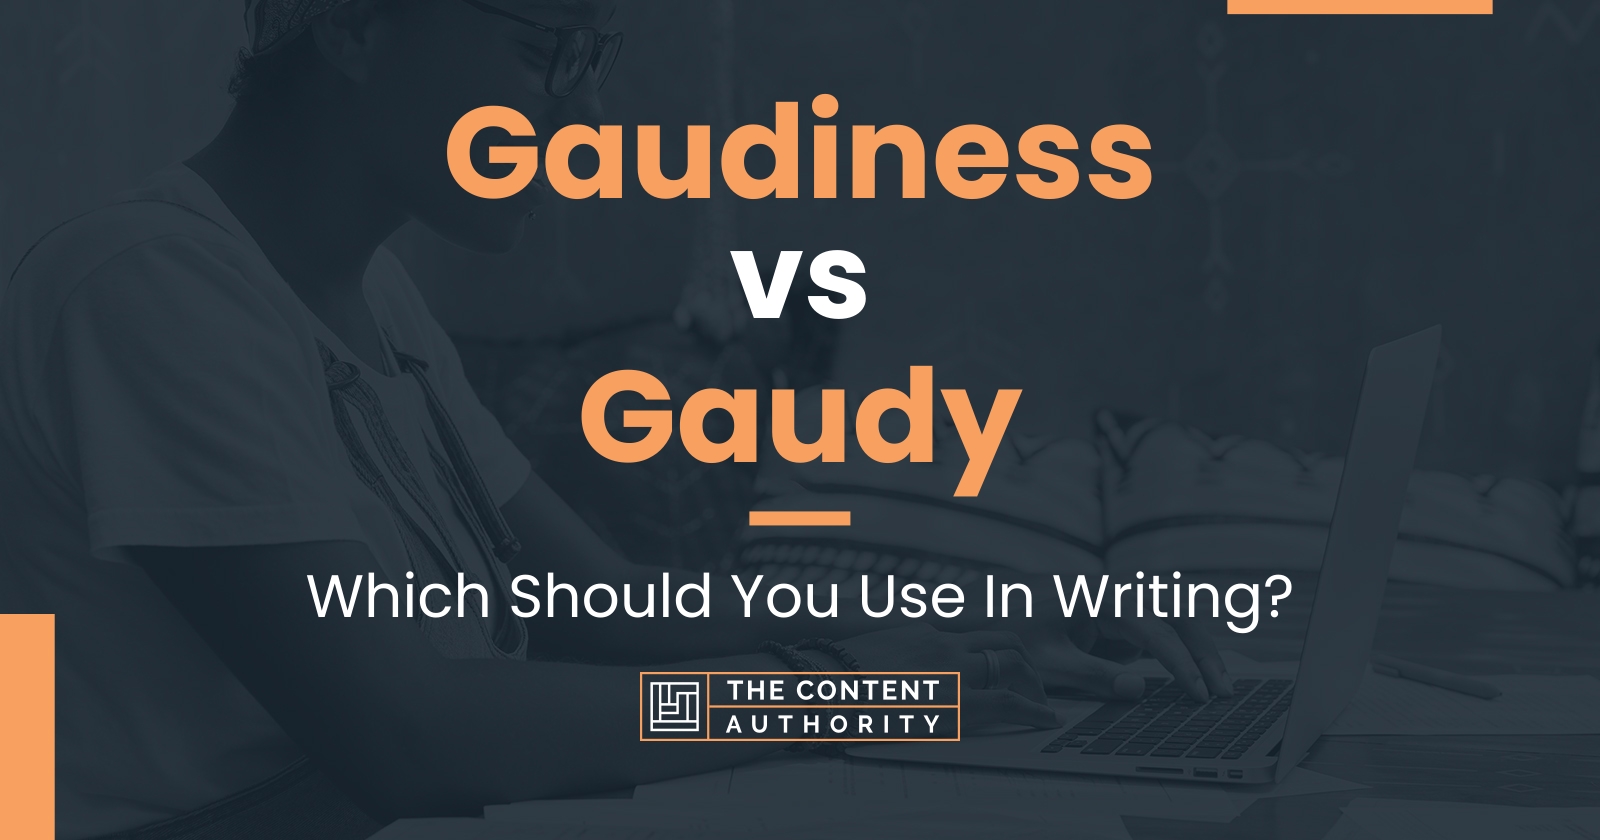 Gaudiness vs Gaudy: Which Should You Use In Writing?